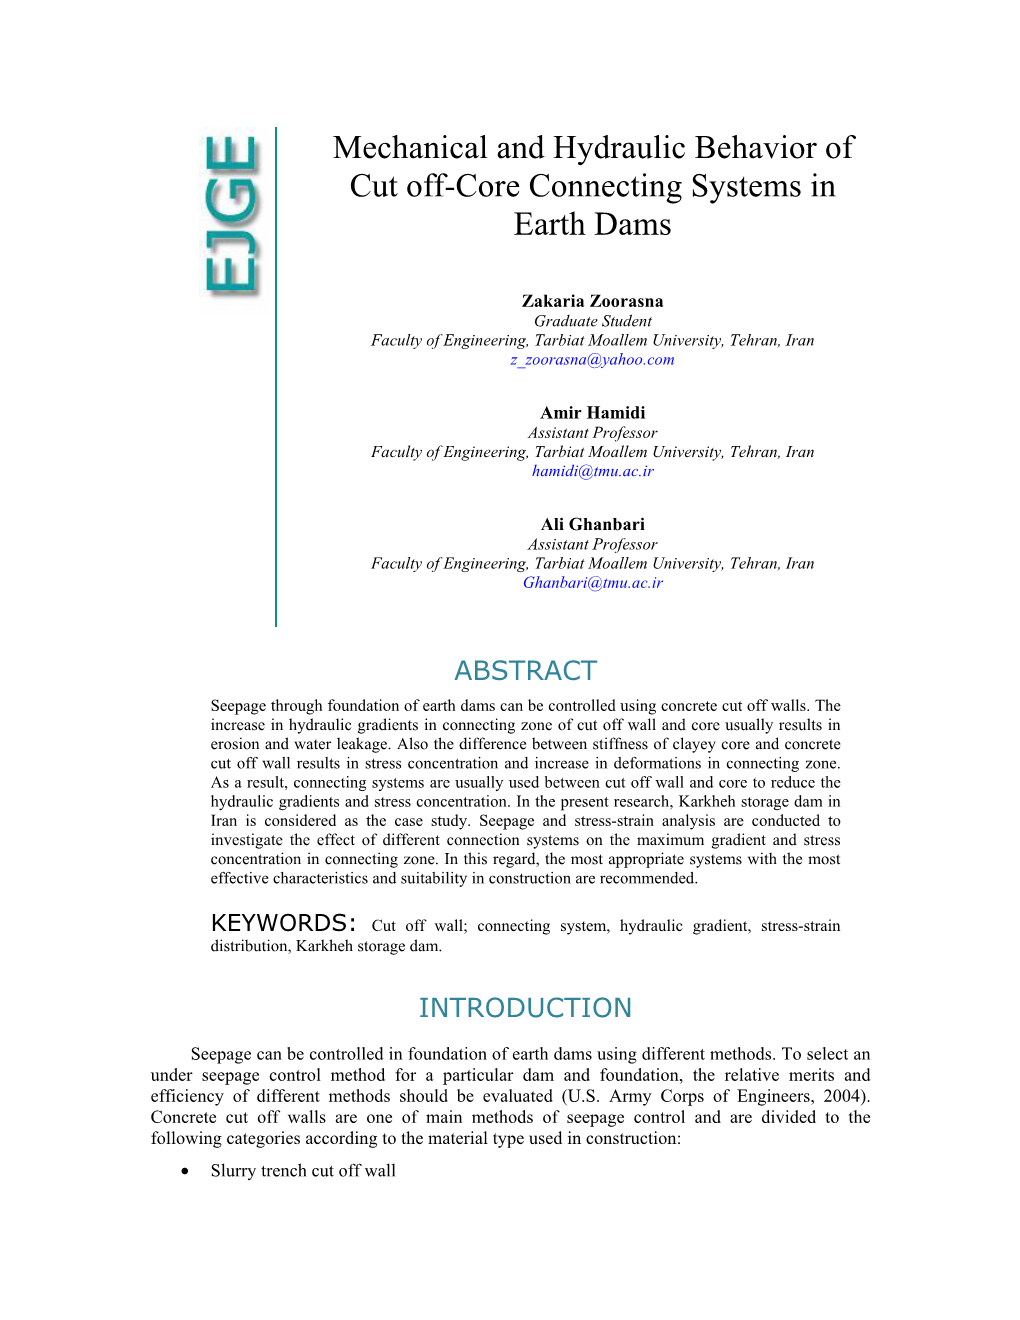 Mechanical and Hydraulic Behavior of Cut Off-Core Connecting Systems in Earth Dams